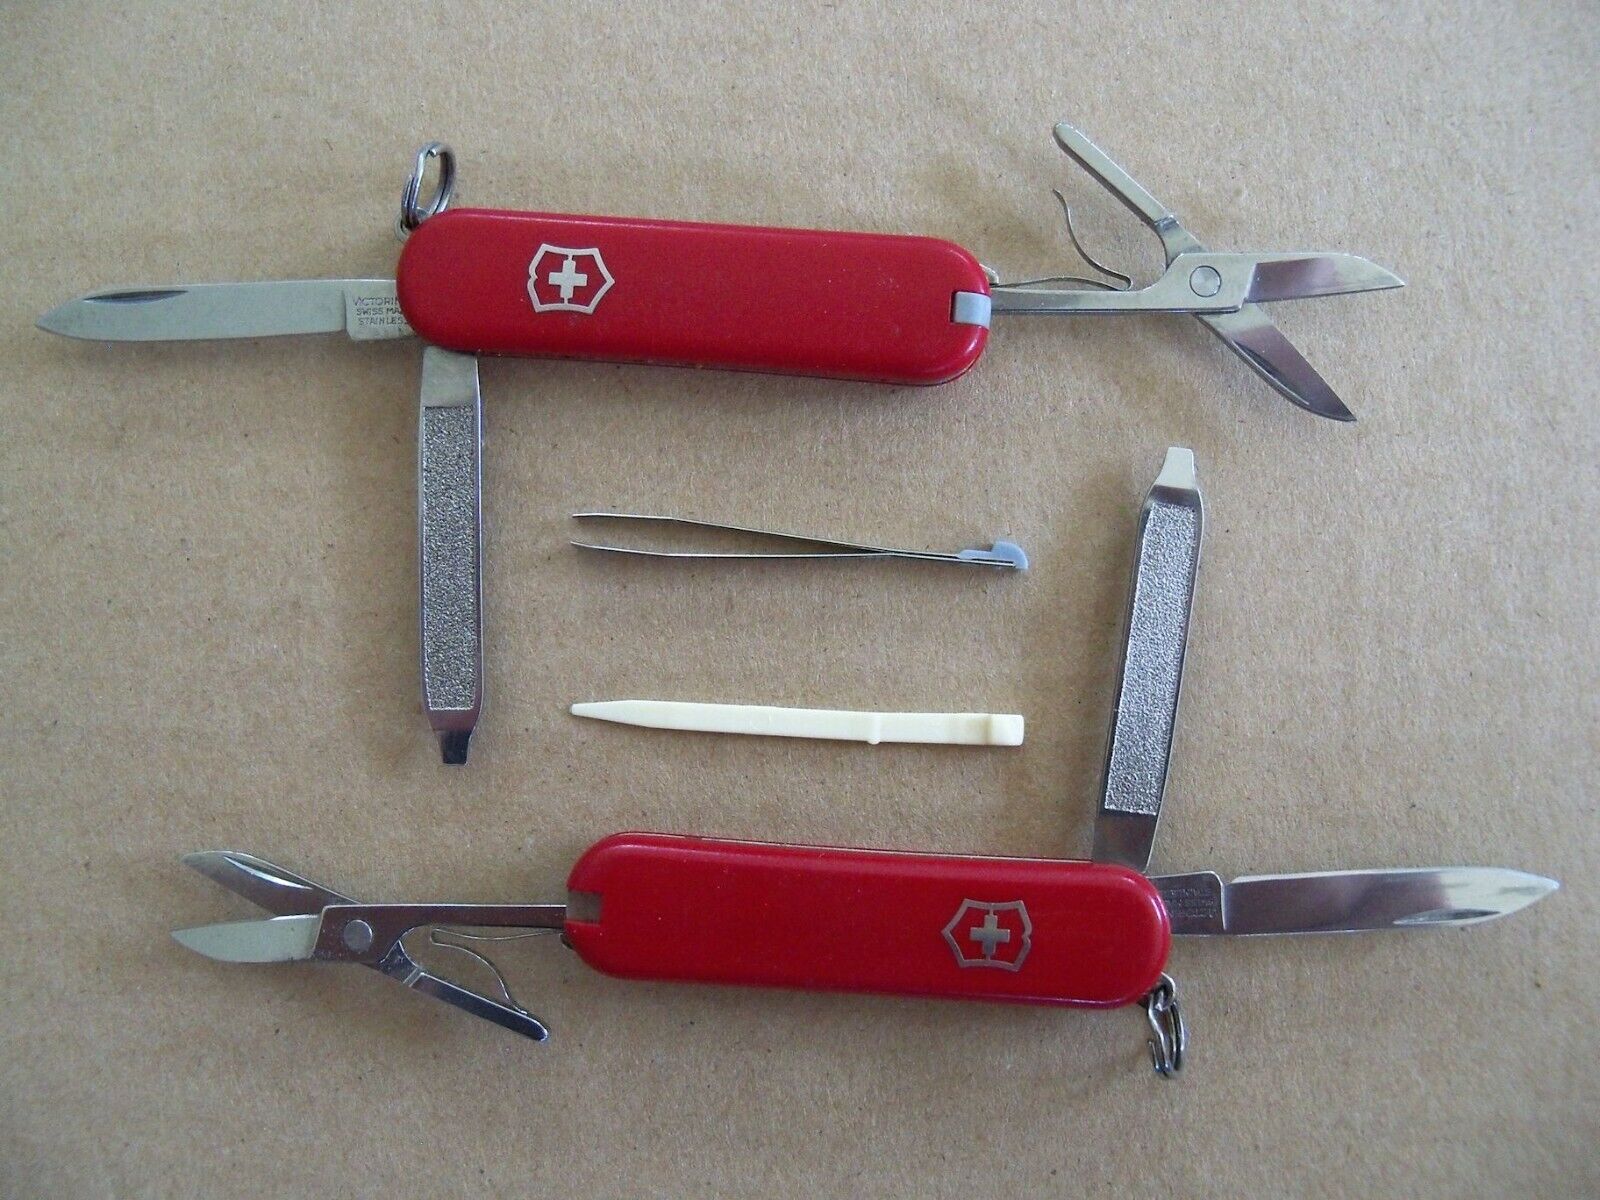 Lot of 2 Victorinox Classic SD Swiss Army Pocket Knife - Red - Very Good